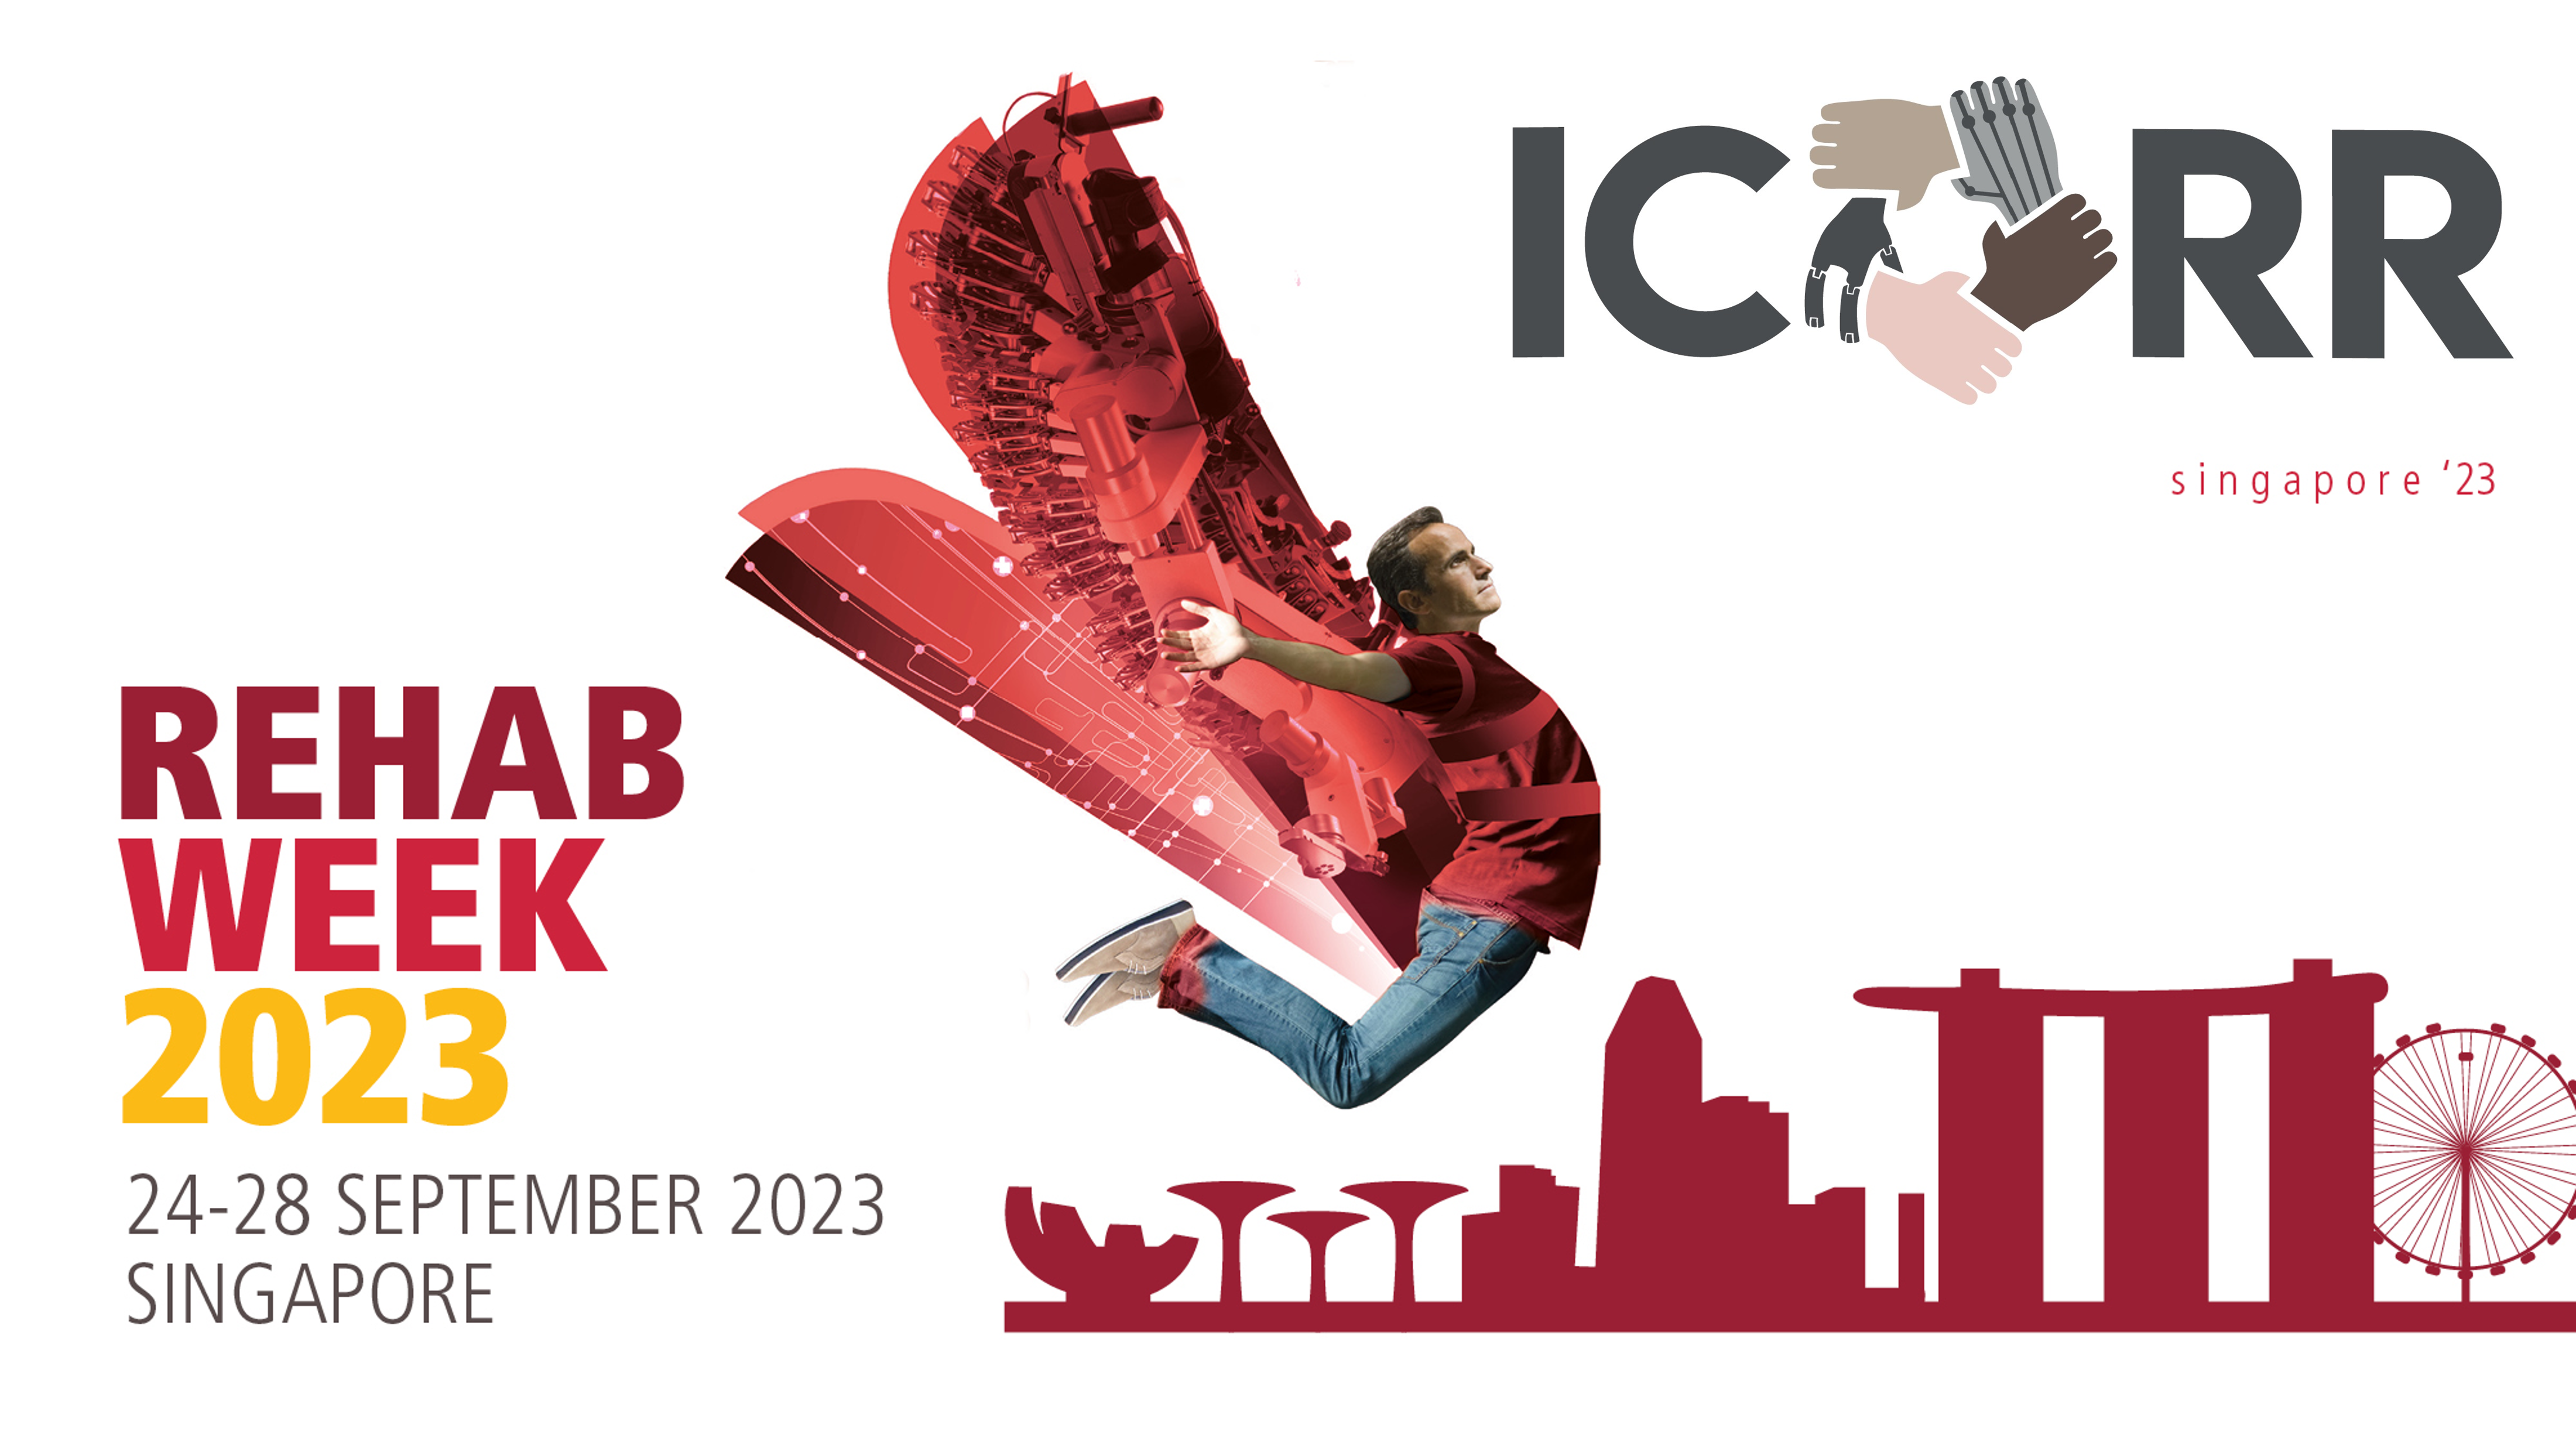 ICORR 2023, Singapore  (September 24th to 28th)